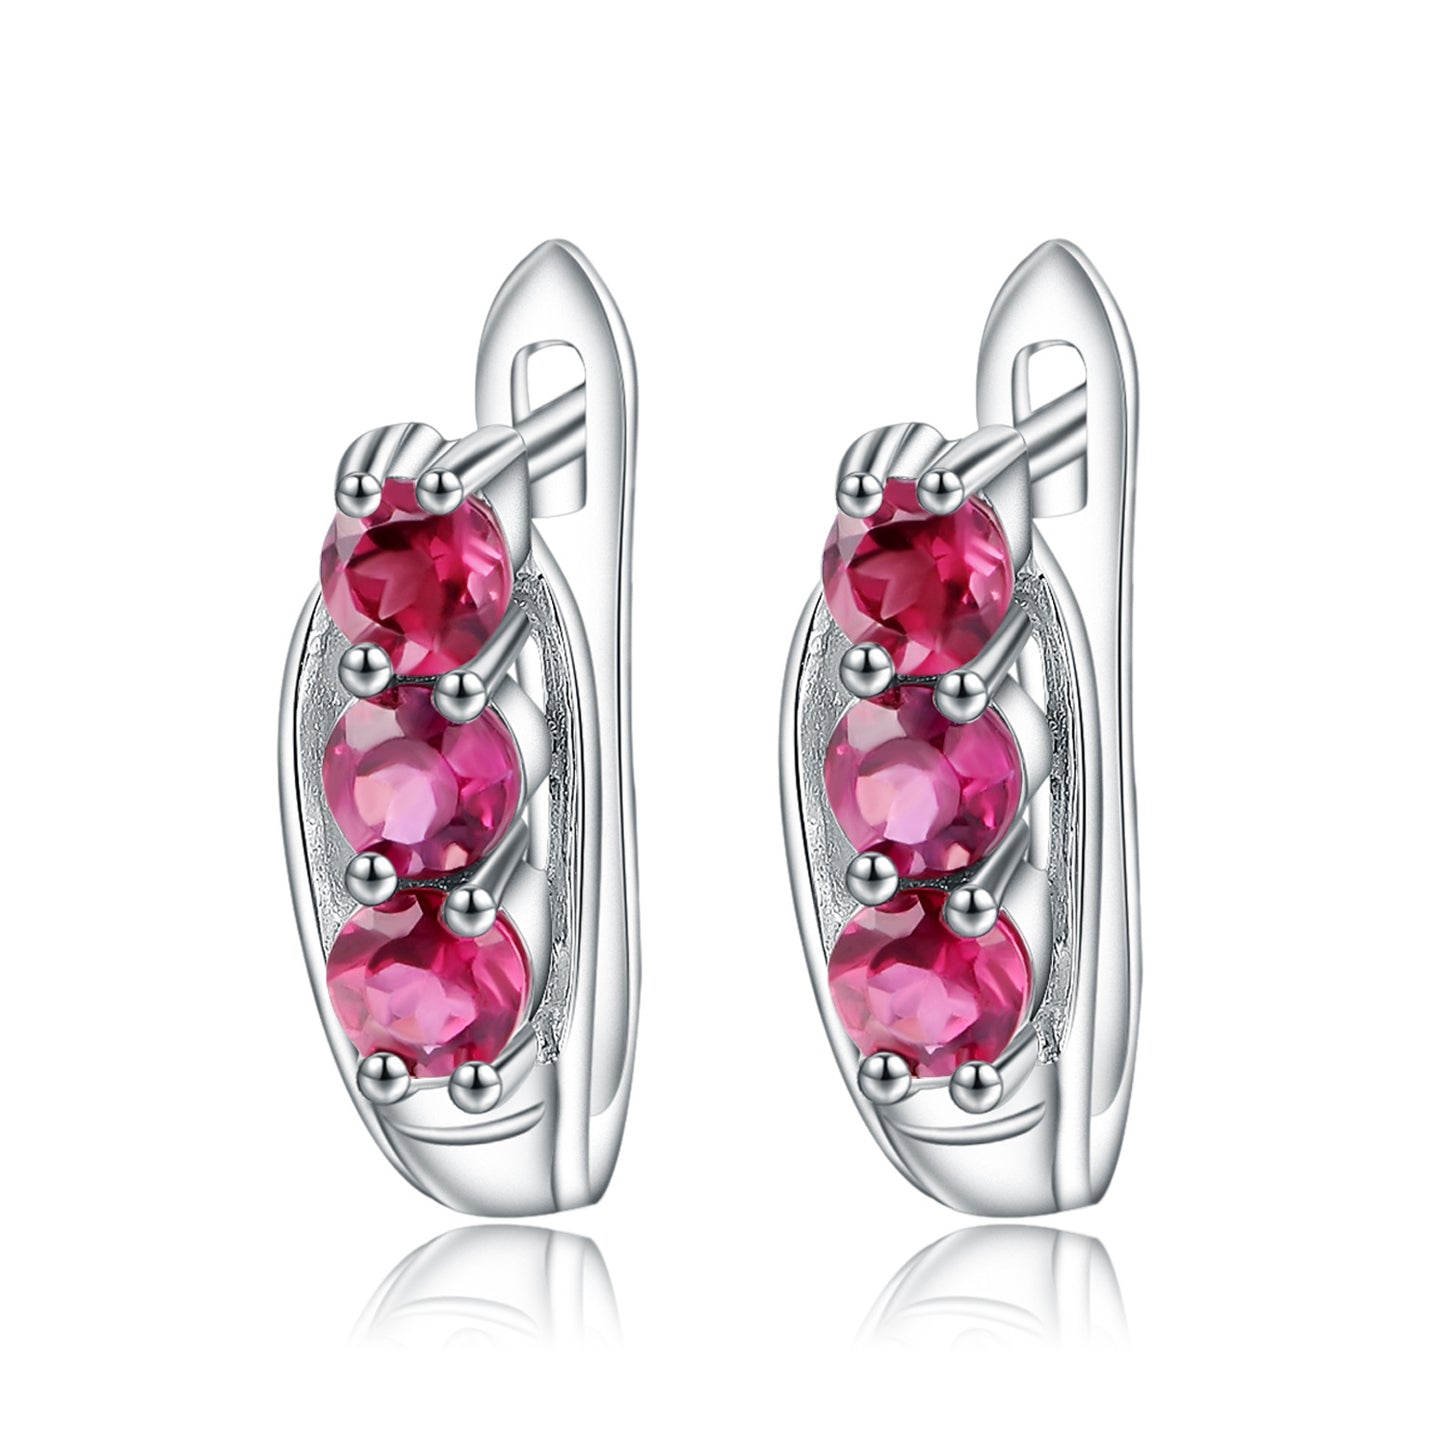 European Inlaid Natural Rose Pomegranate Three Stones Beading Silver Studs Earrings for Women